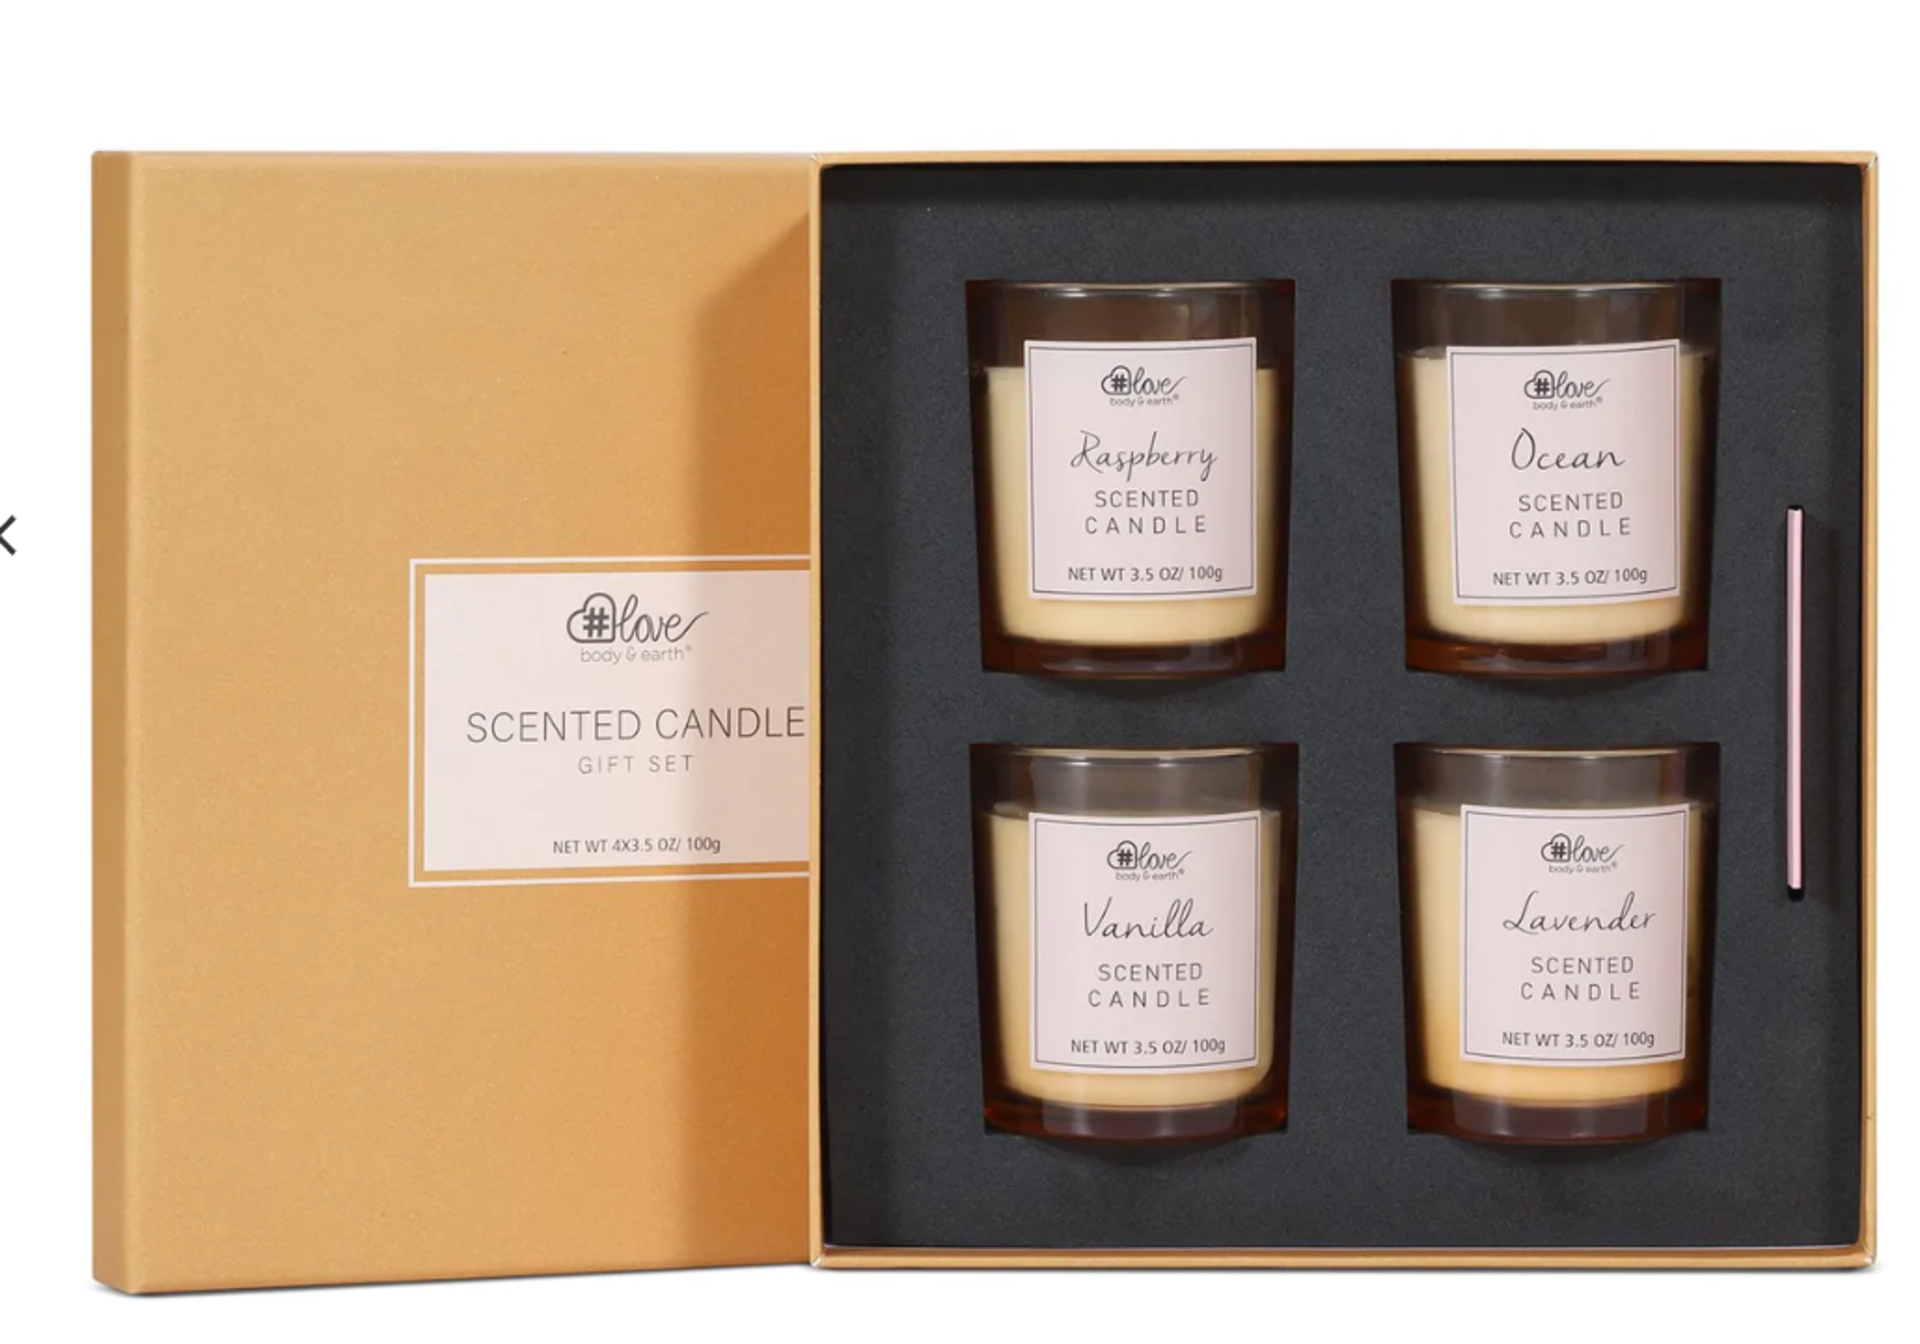 6 X New Boxed Sets of 4 Body & Earth Love Scented Candle Set. (BEL-SC-04) 4 FRAGRANCE SCENTS: This